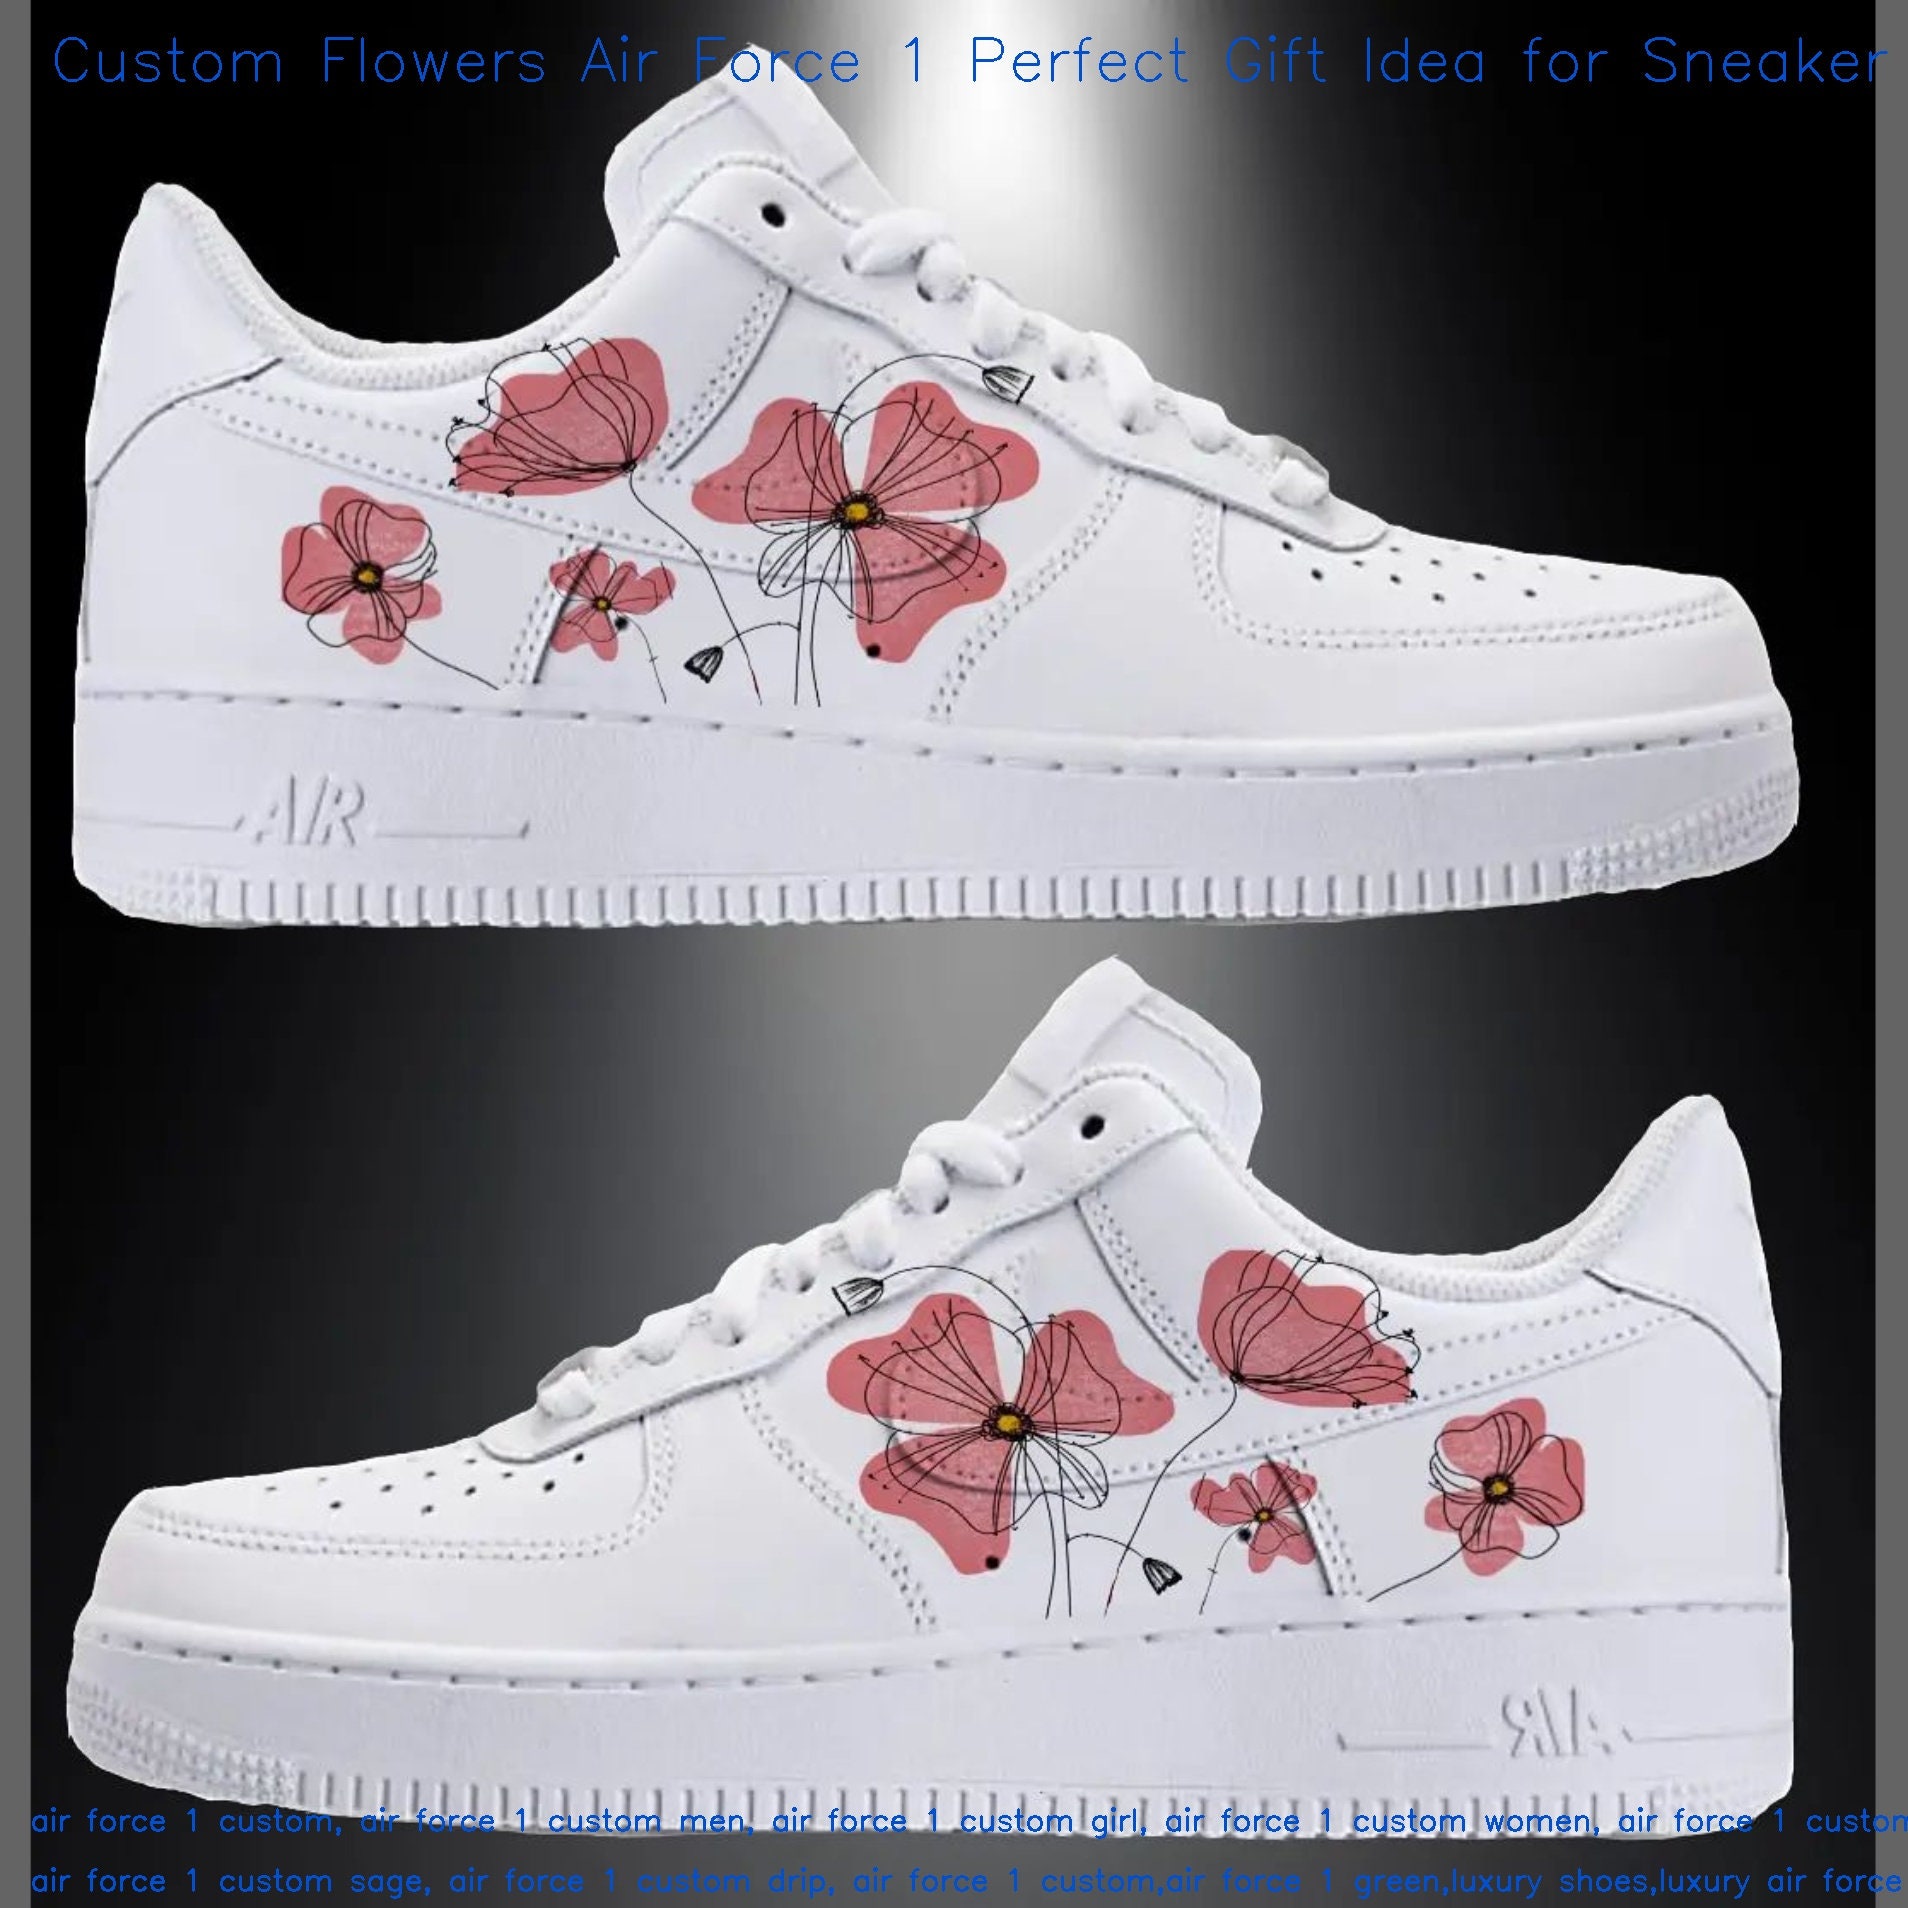 Custom Flowers Air Force 1 Perfect Gift Idea for Sneaker - Etsy